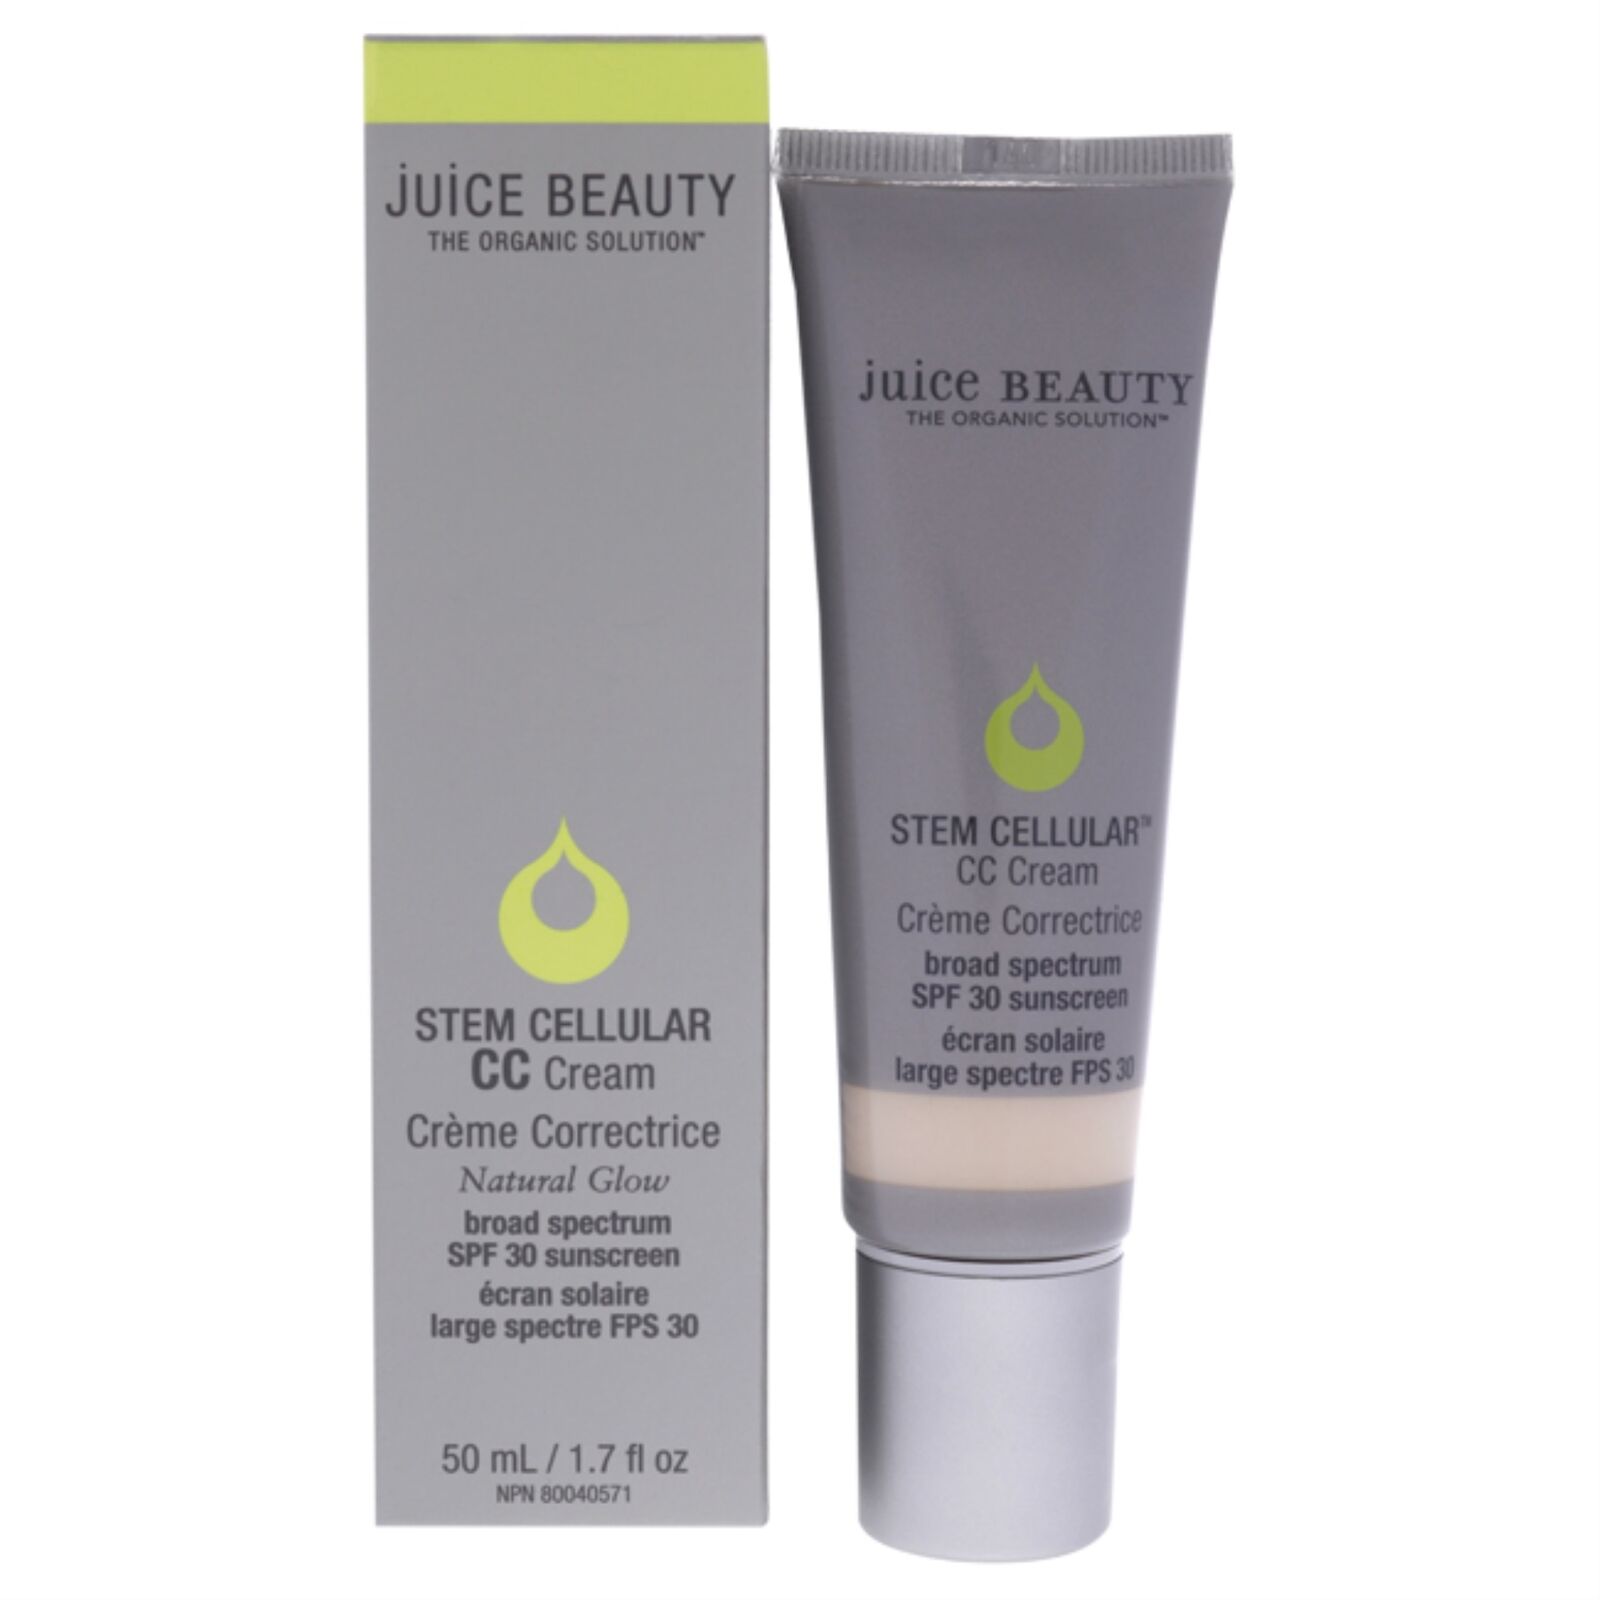 Stem Cellular Cc Cream Spf 30 - Natural Glow By Juice Beauty For Women - 1.7 ...